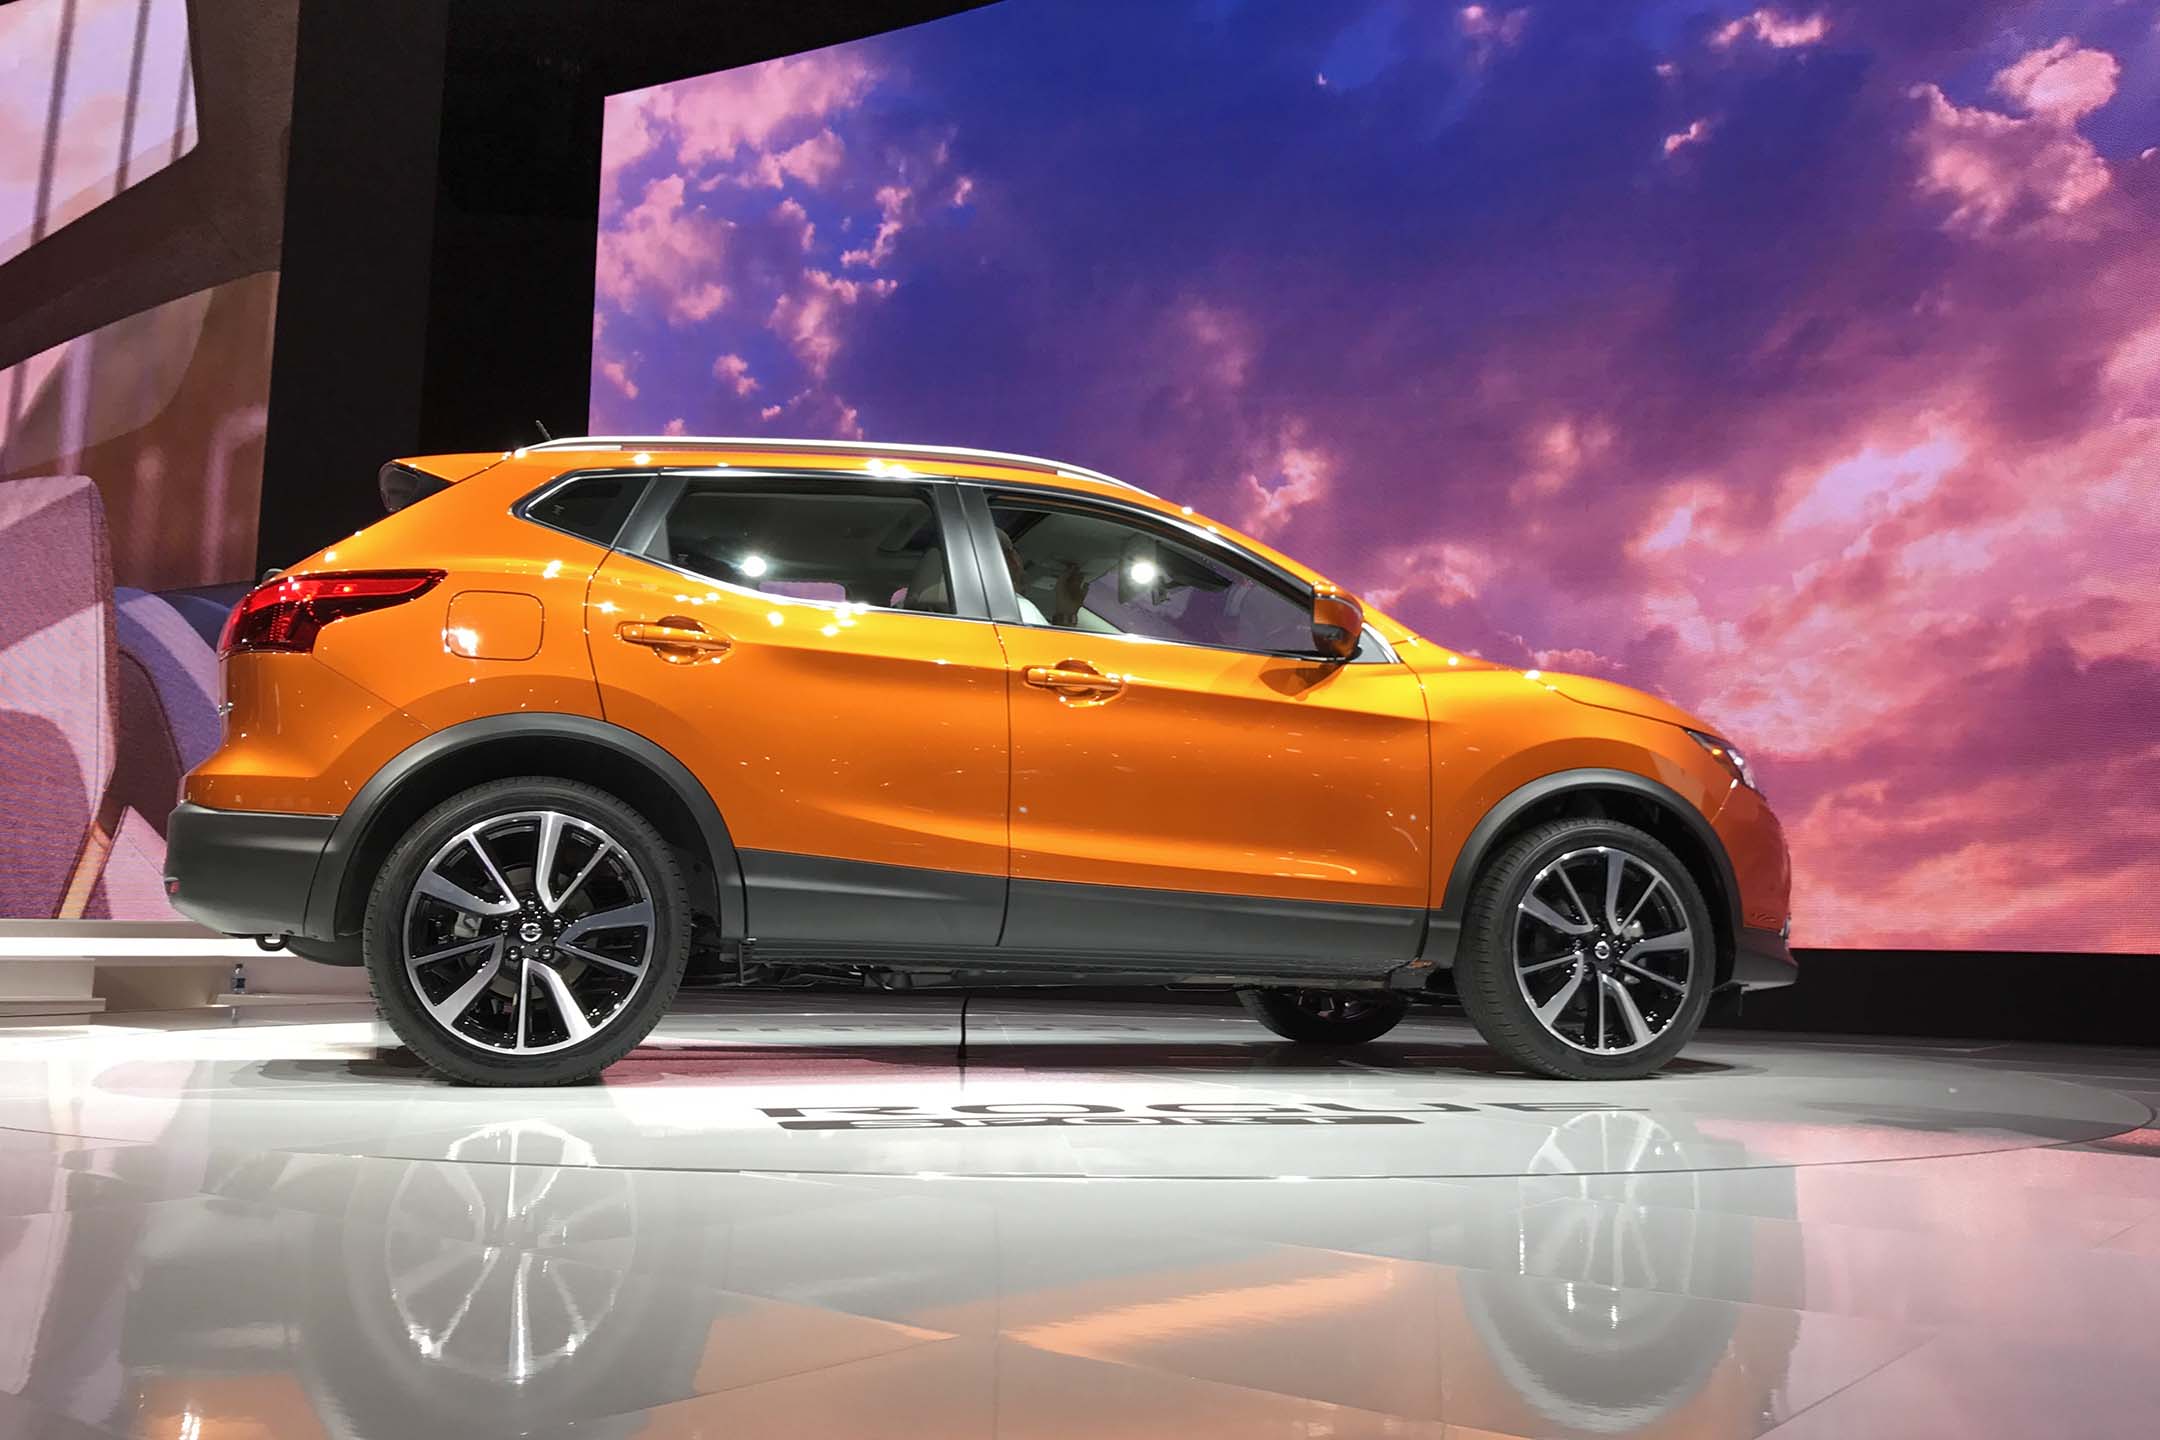 MB: So glad they didn’t change the name to the generic Rogue Sport moniker used in the US. The compact Qashqai crossover manages to wedge itself under the Rogue and above the Juke in Canada, likely endangering not only the Juke but also likely taking a potential bite out of Rogue and Sentra sales as well.